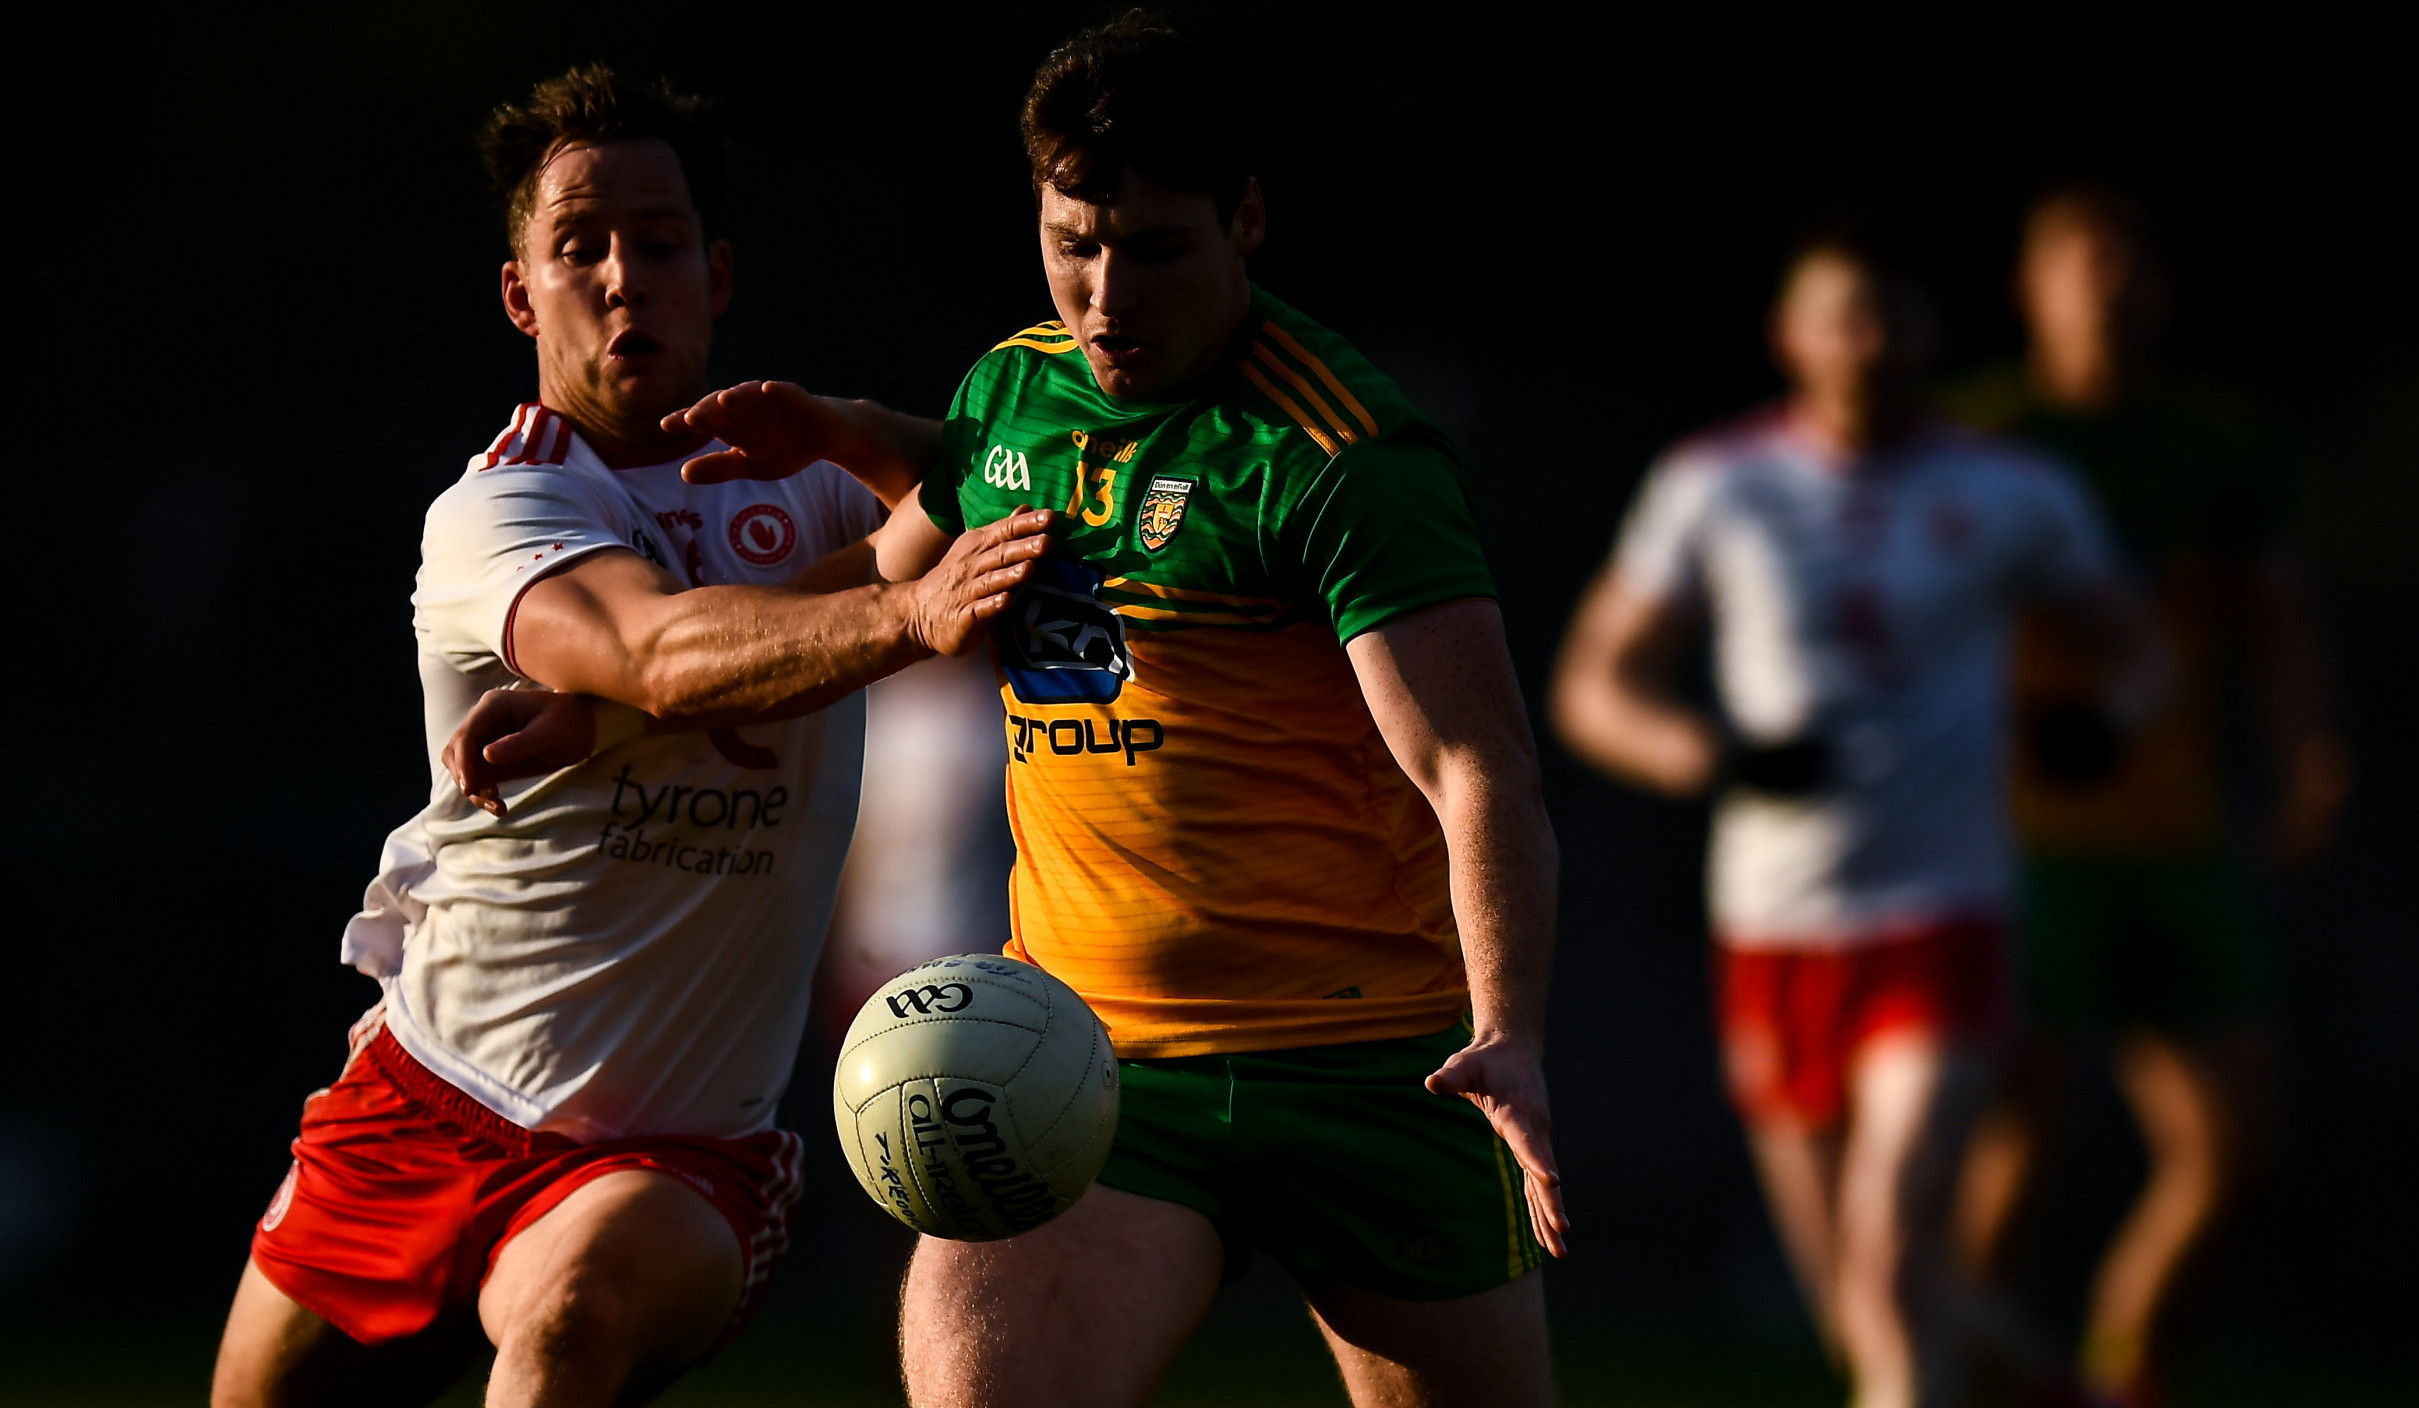 Ulster SFC Quarter Final Preview: Donegal v Tyrone